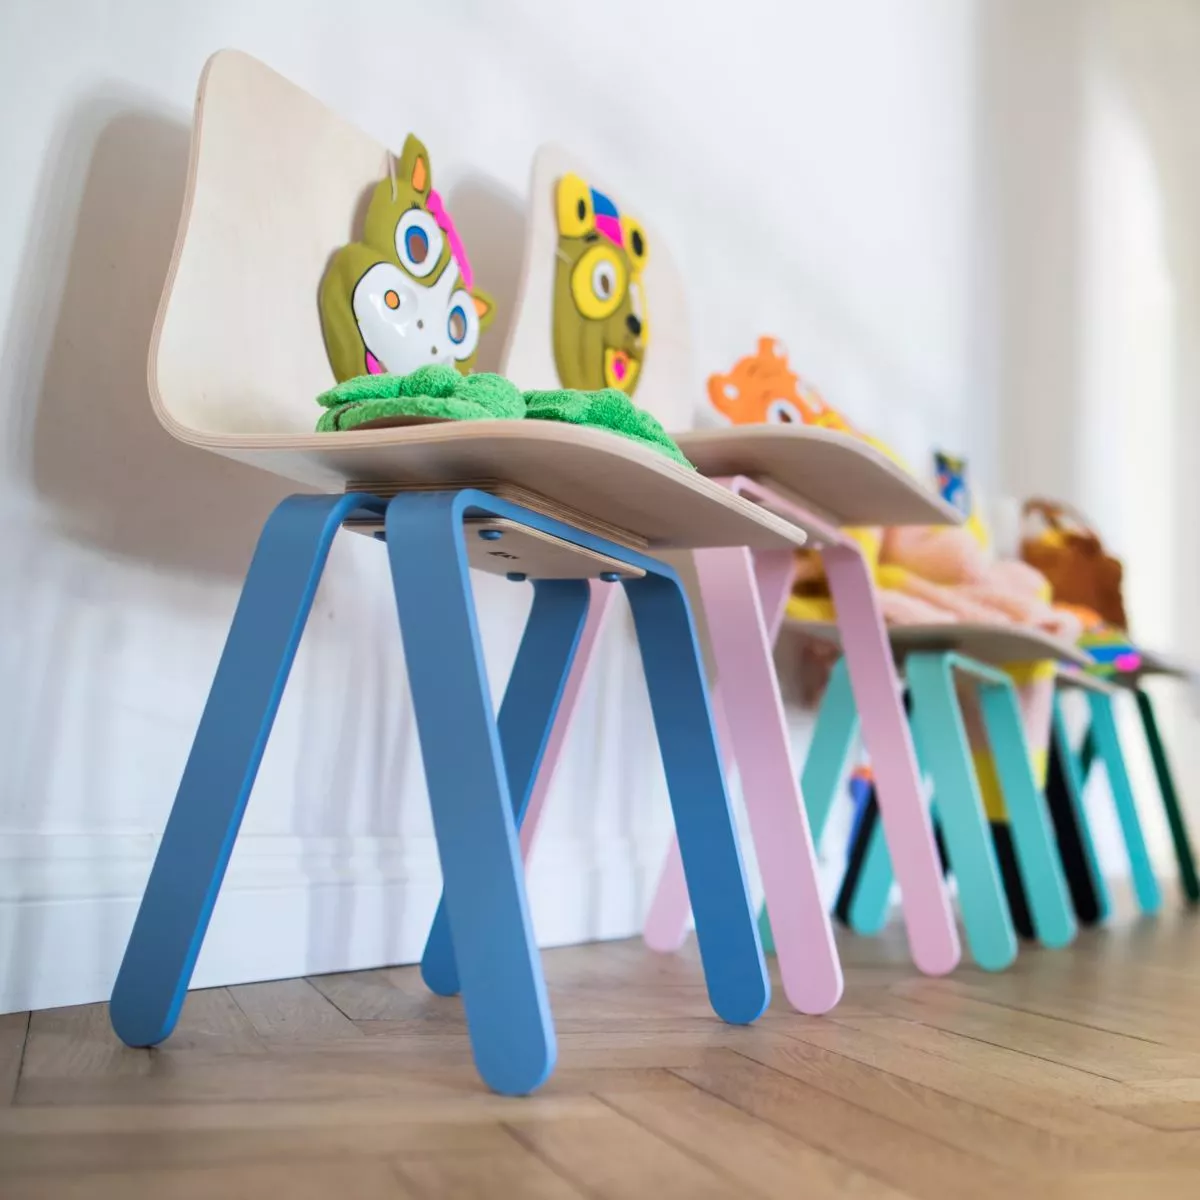 Small oldschool children's chair for ages 2 to 6